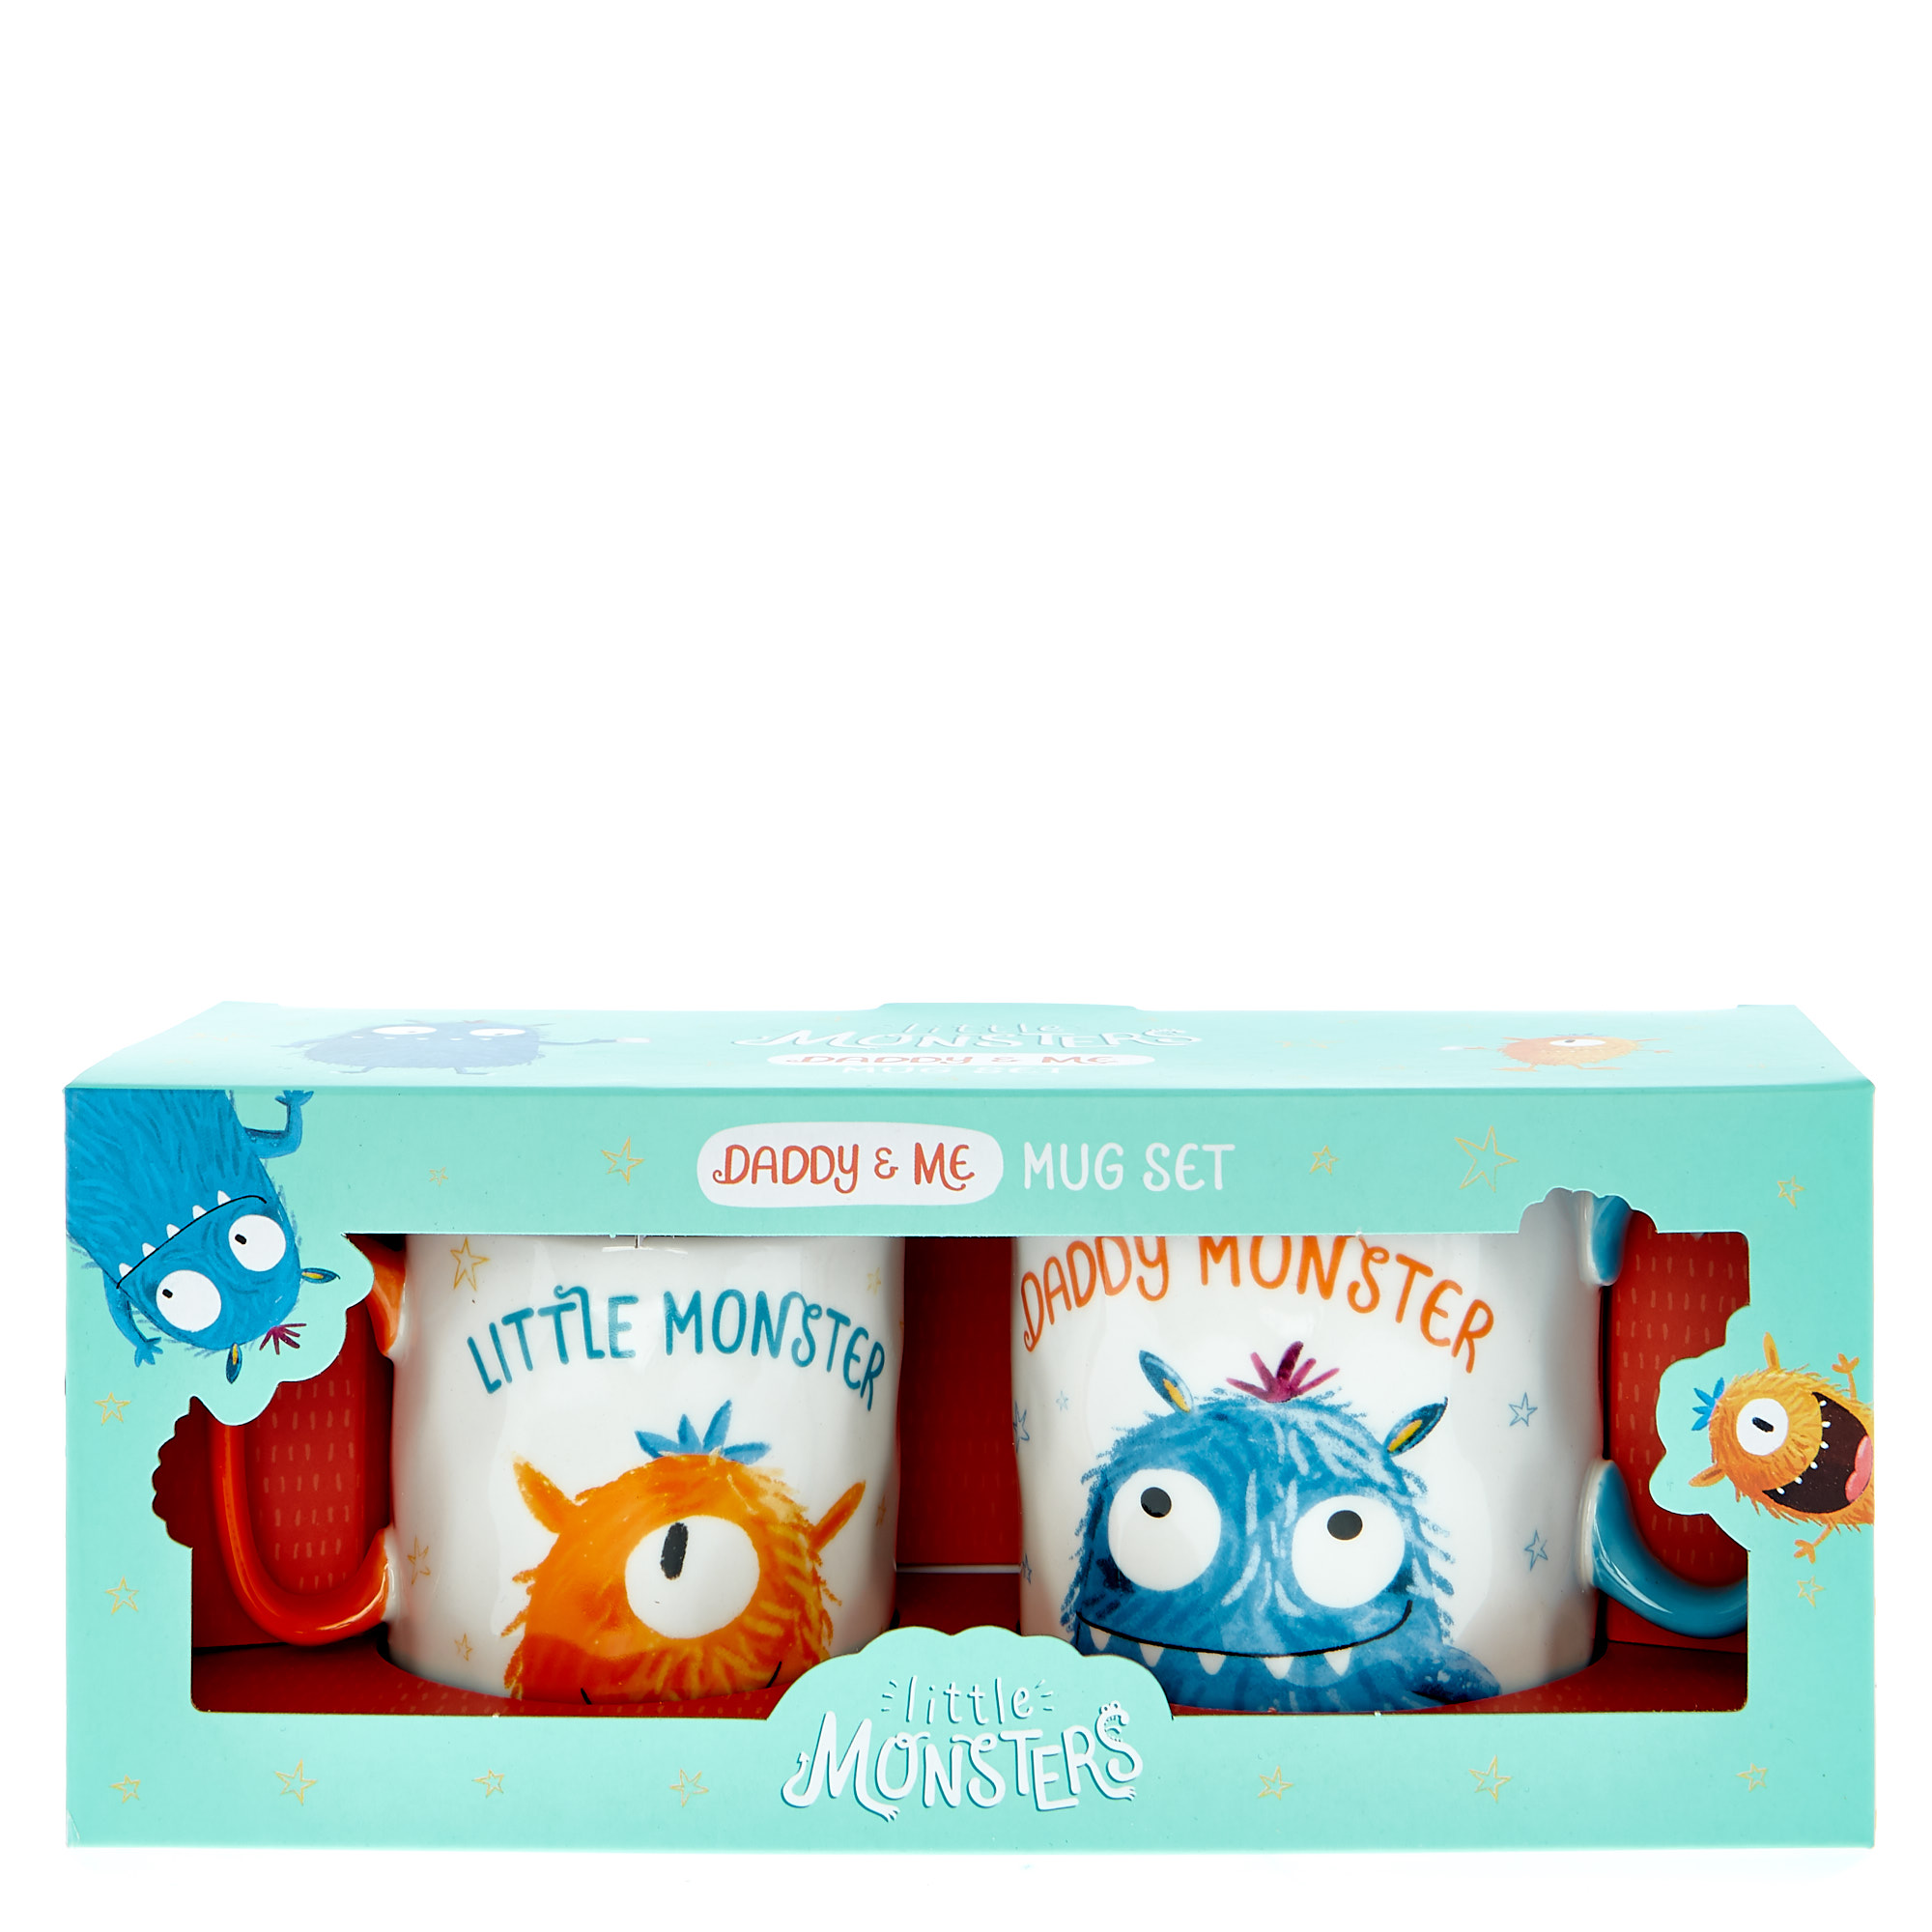 Little Monsters Daddy & Me Mugs - Set Of 2